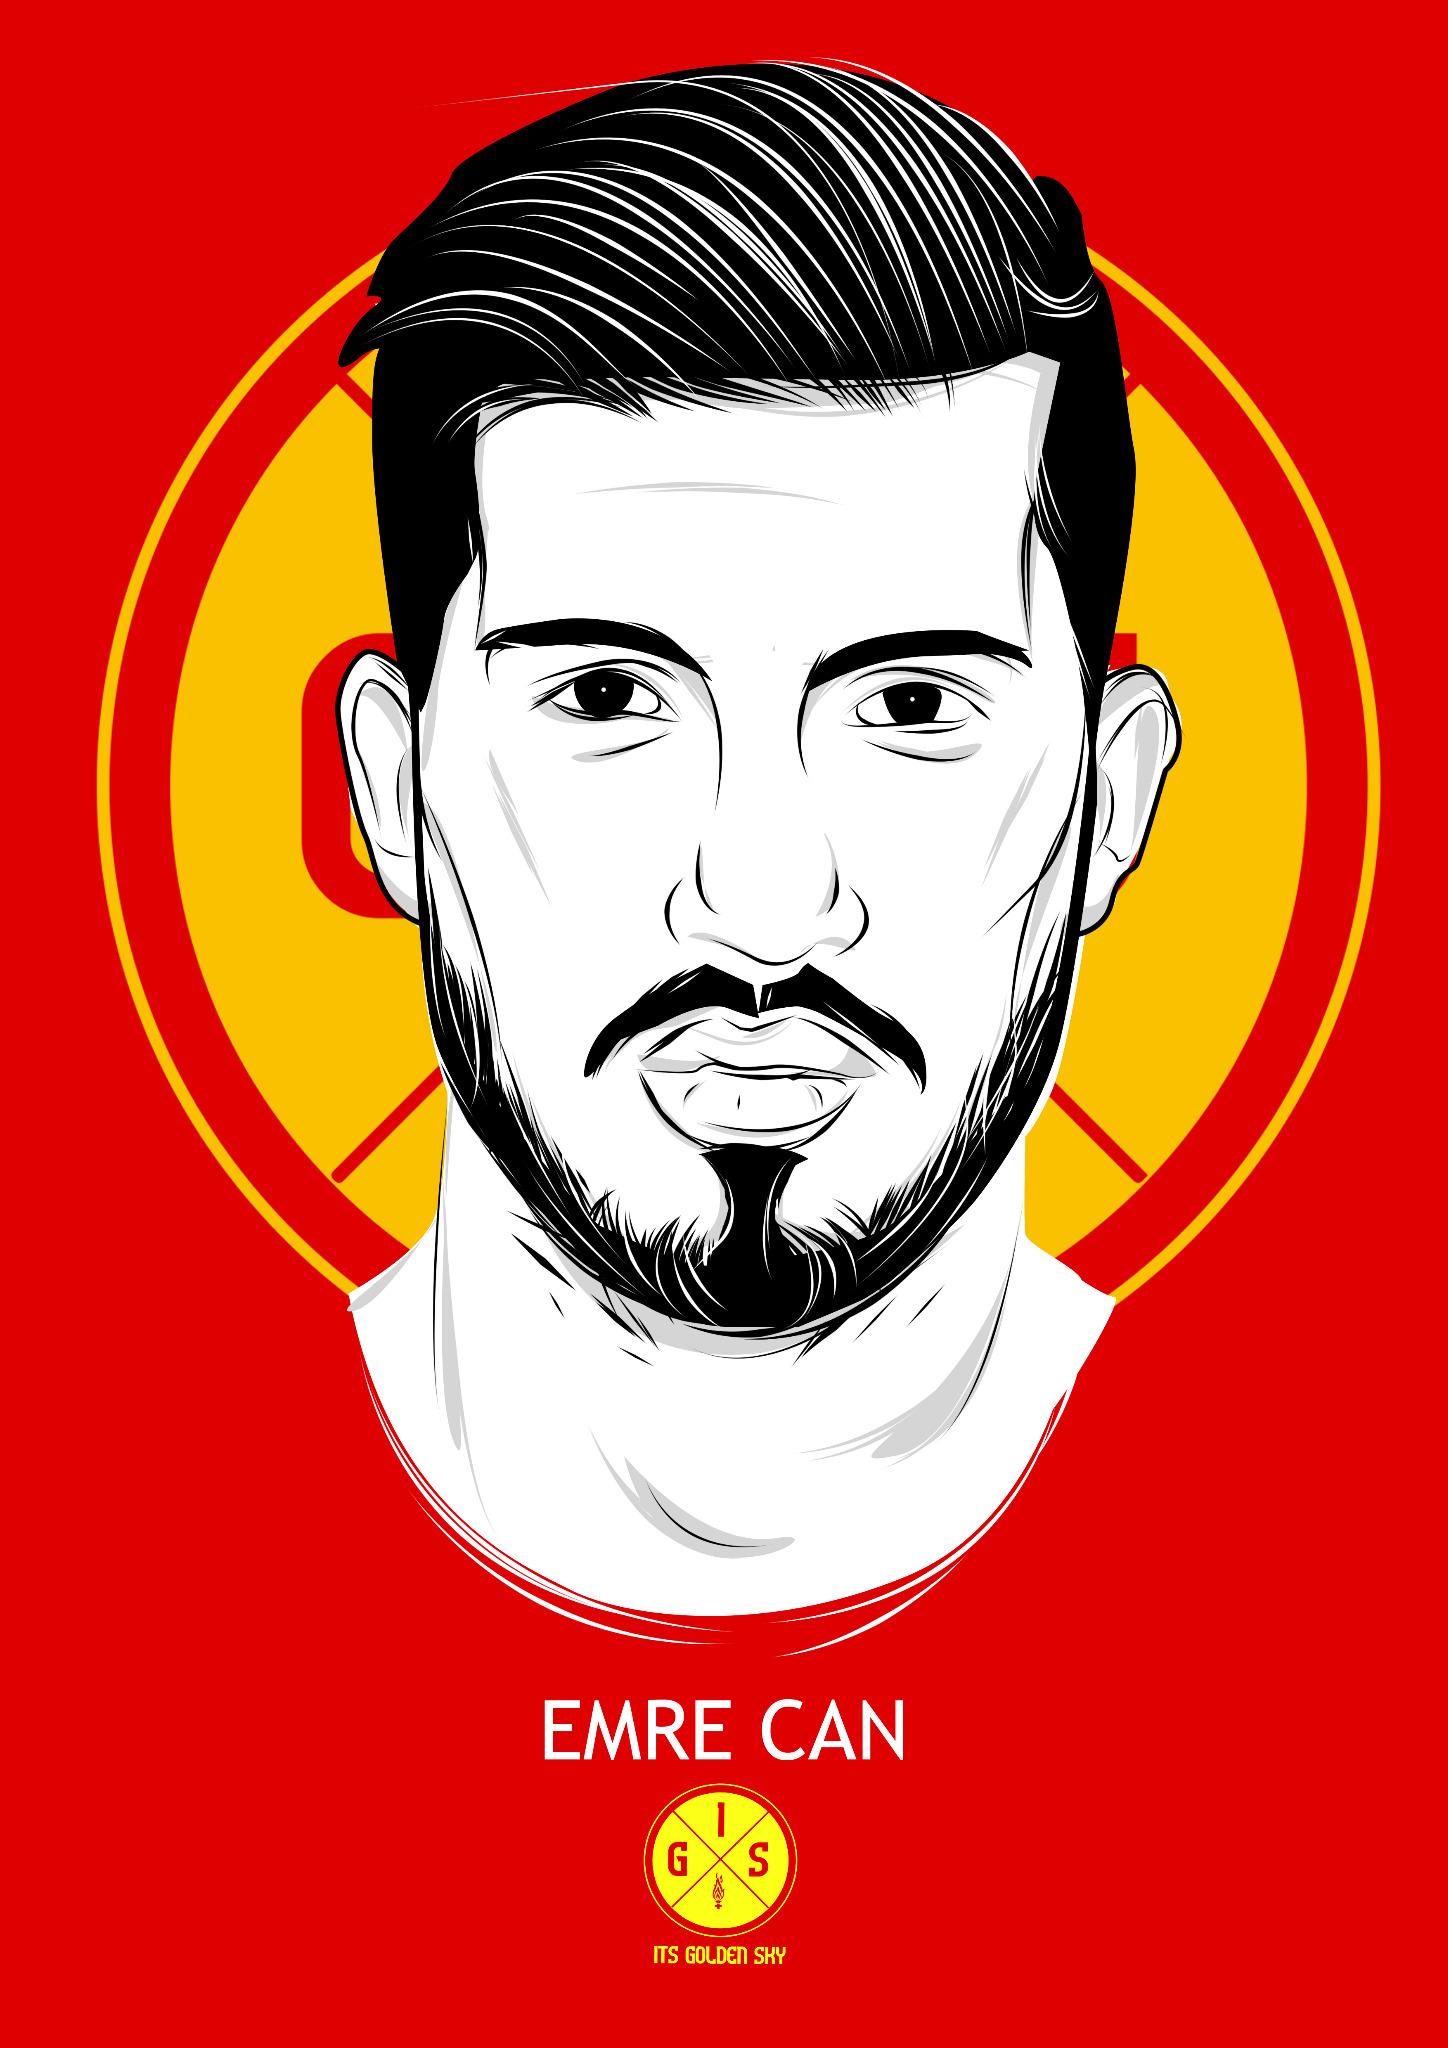 Happy Birthday to Emre Can who turned 21 today. 